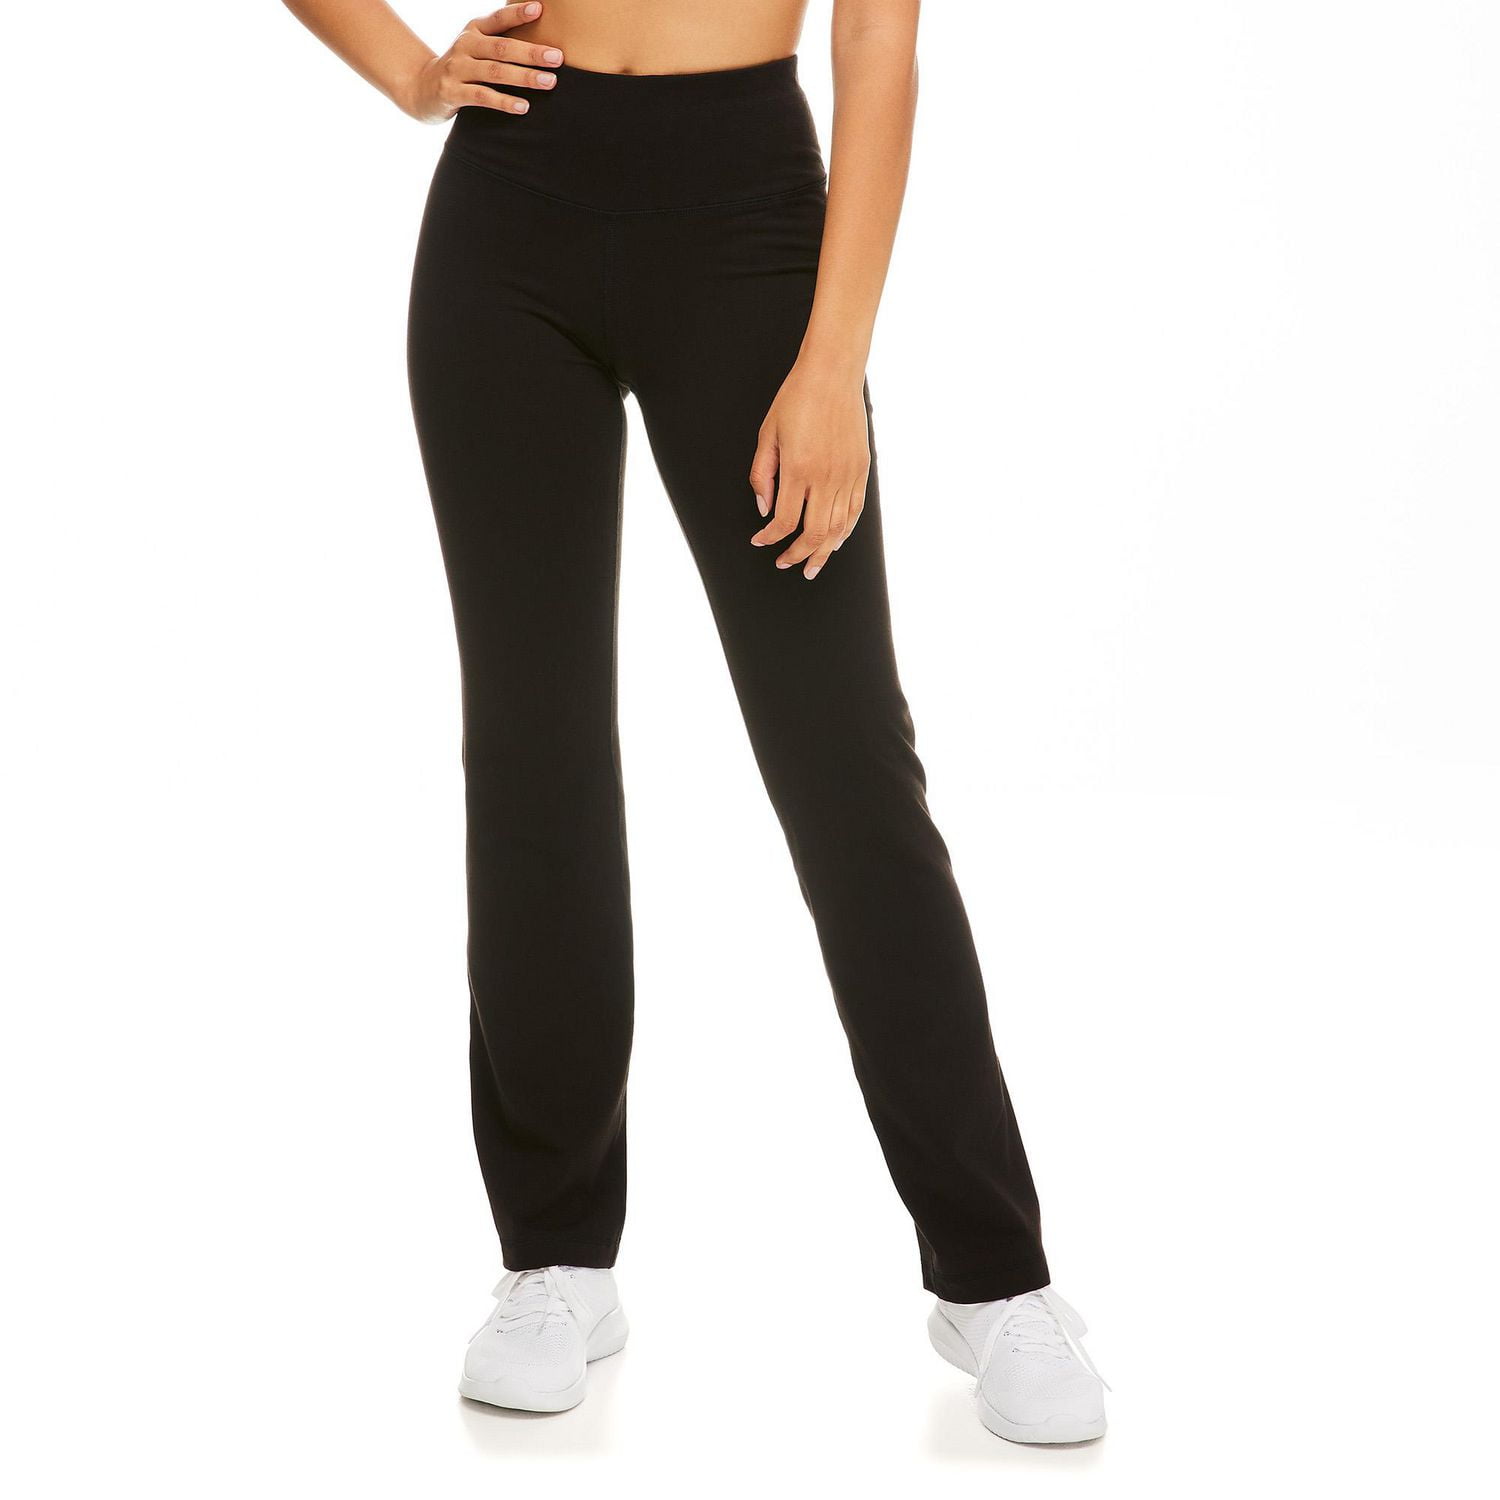 Athletic Works Women's Dri-More Core Athleisure Relaxed Fit Yoga